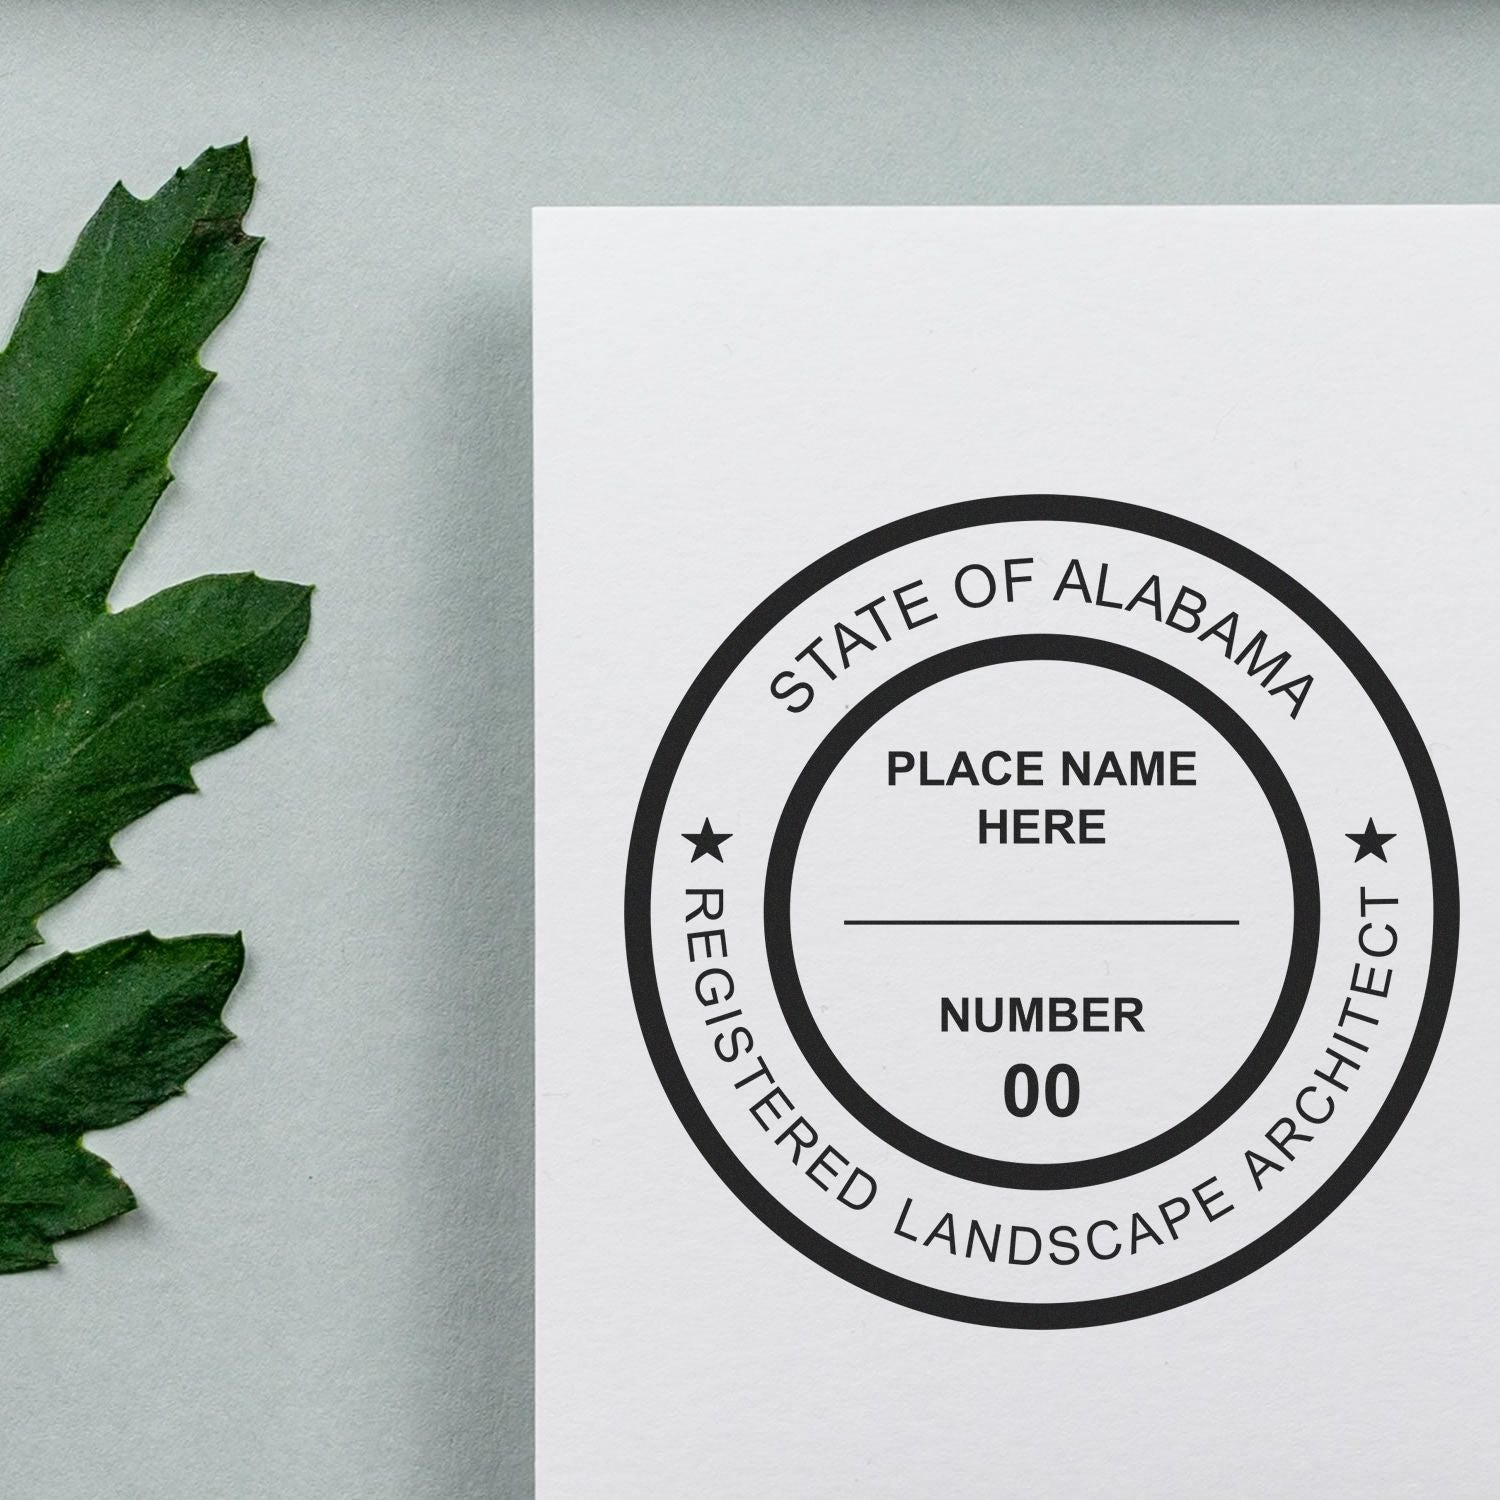 The main image for the Self-Inking Alabama Landscape Architect Stamp depicting a sample of the imprint and electronic files